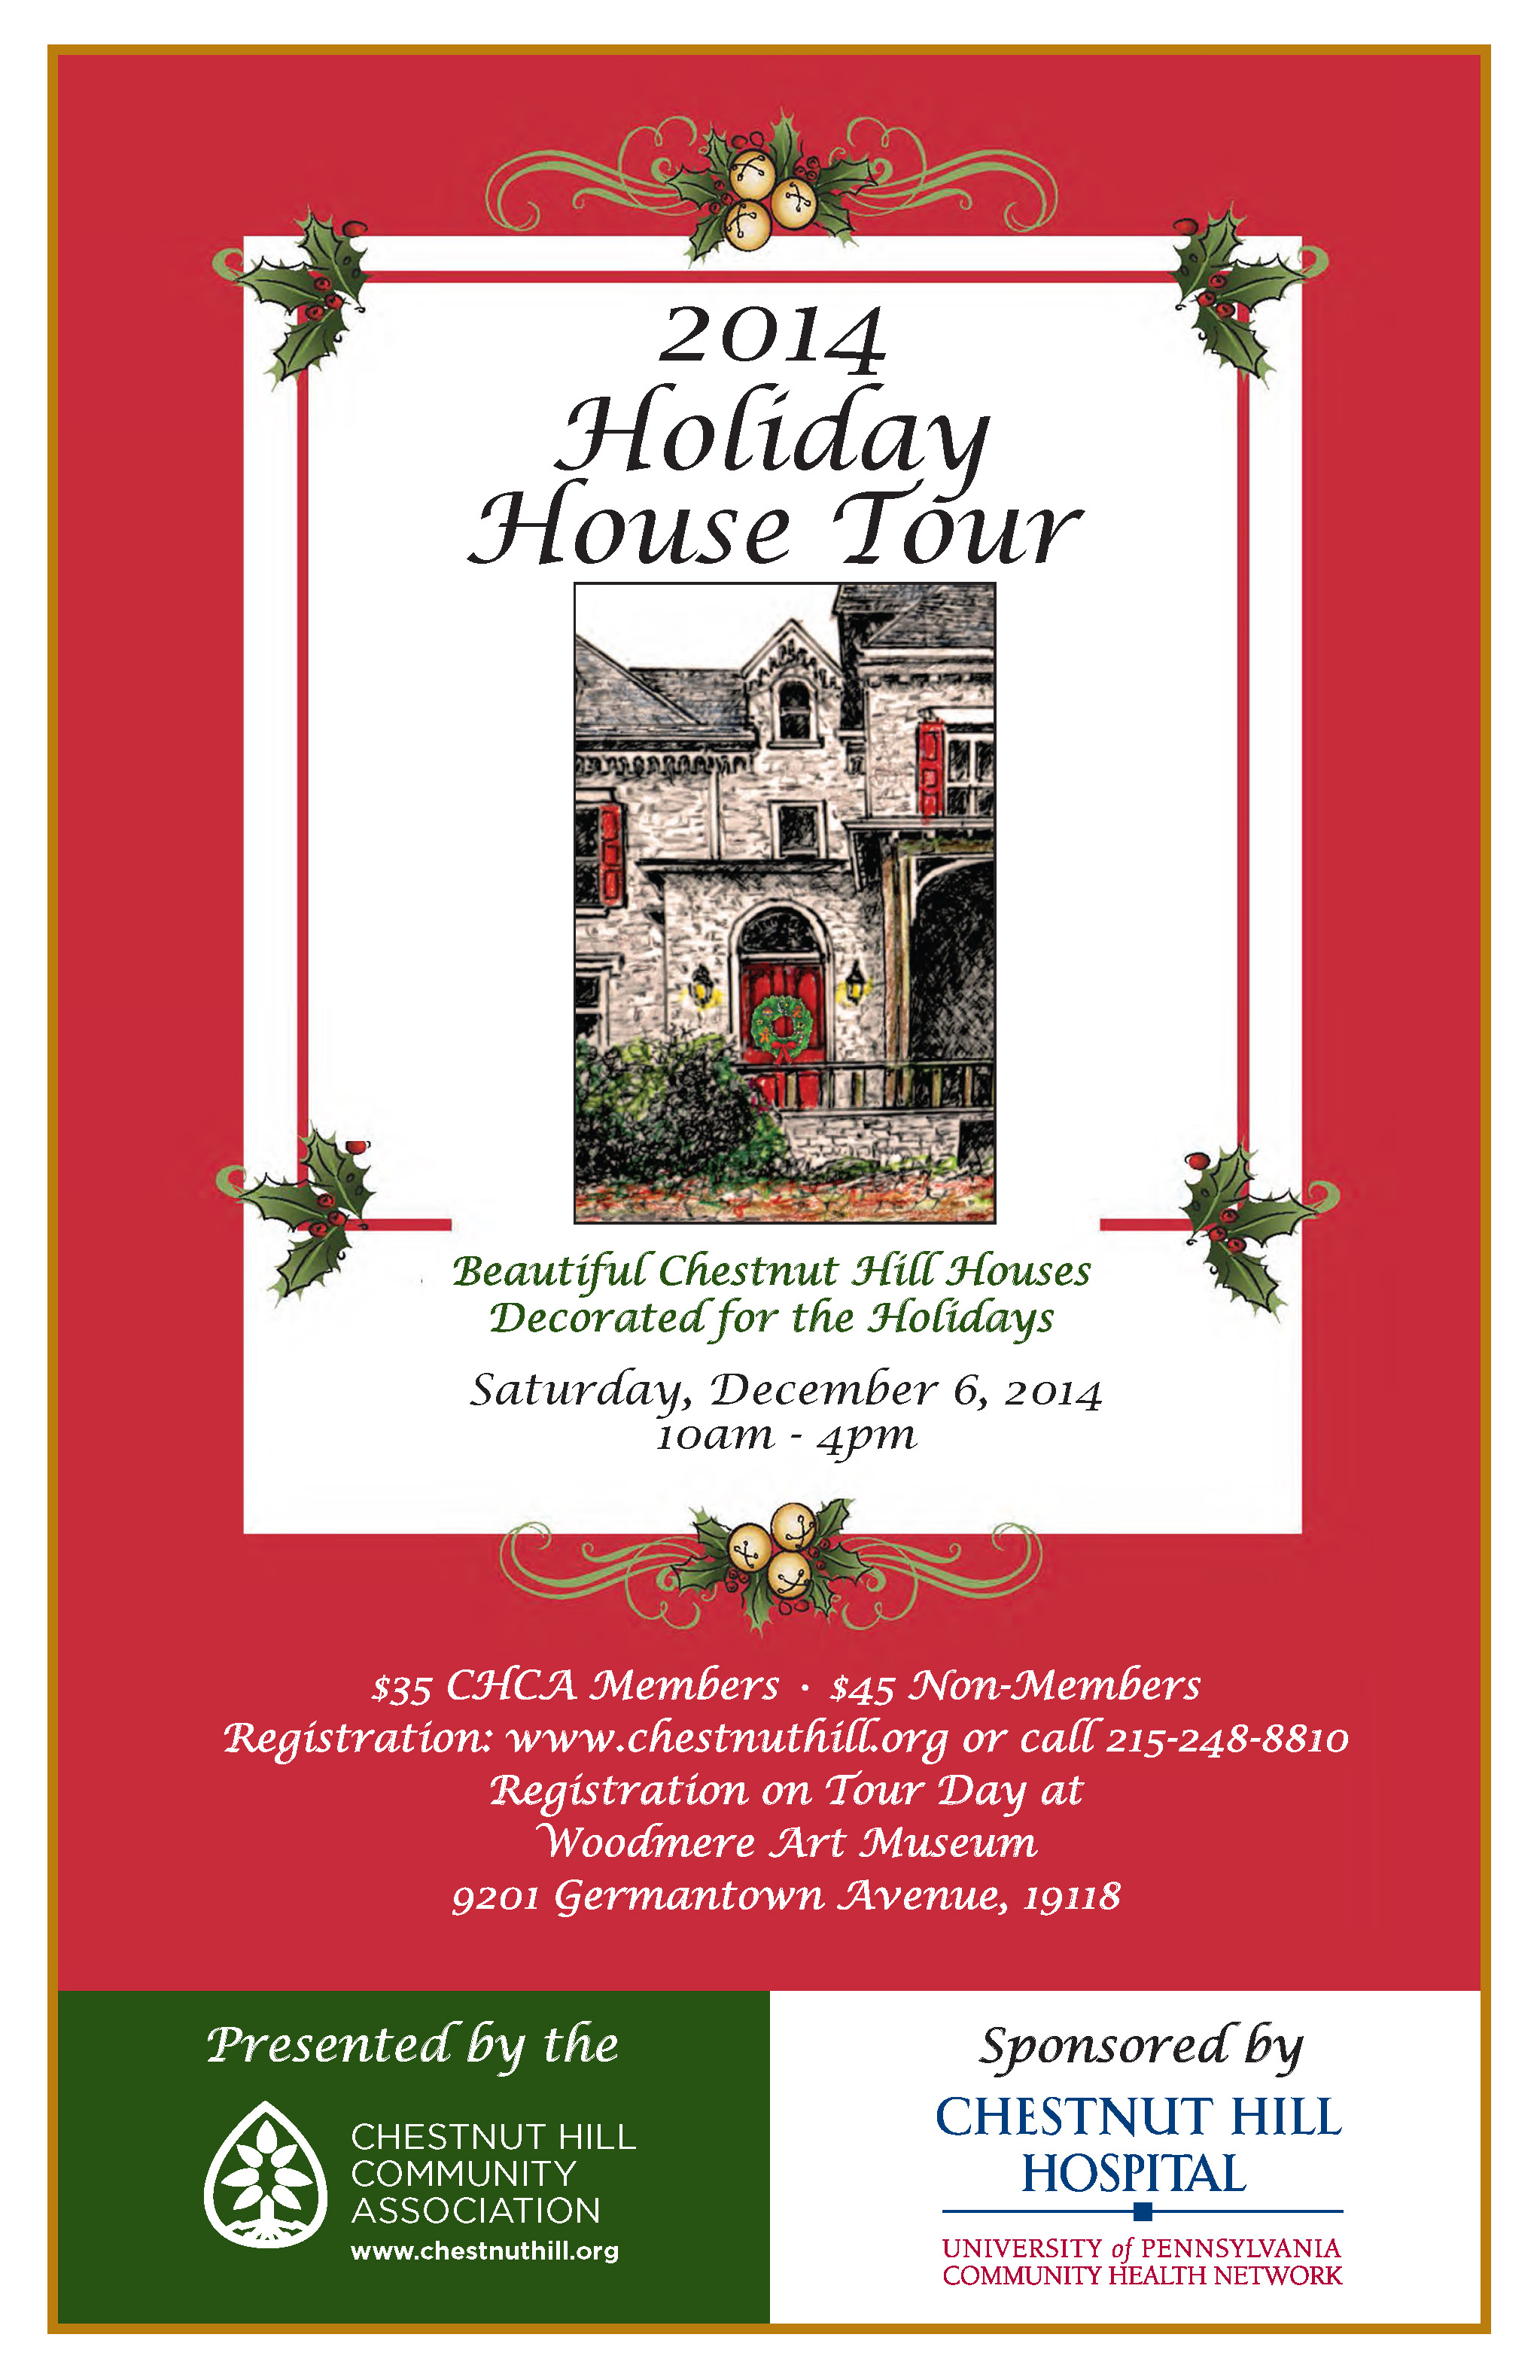 Holiday House Tour 2014 Poster